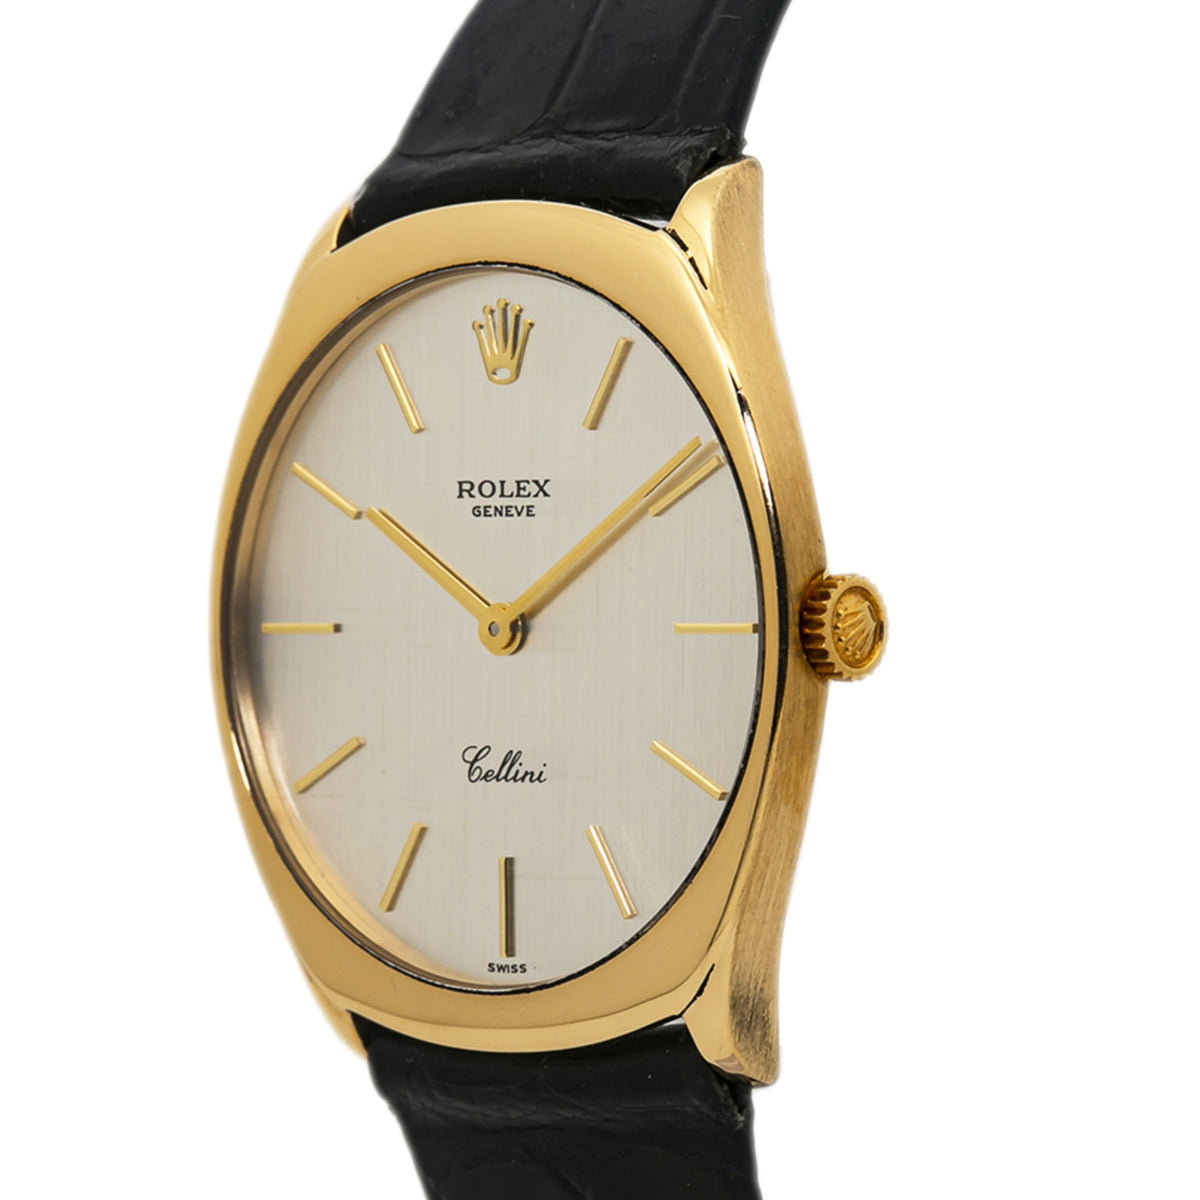 Rolex Cellini 4133 18k Yellow Gold Men's Hand Wind Watch Silver Dial 31mm